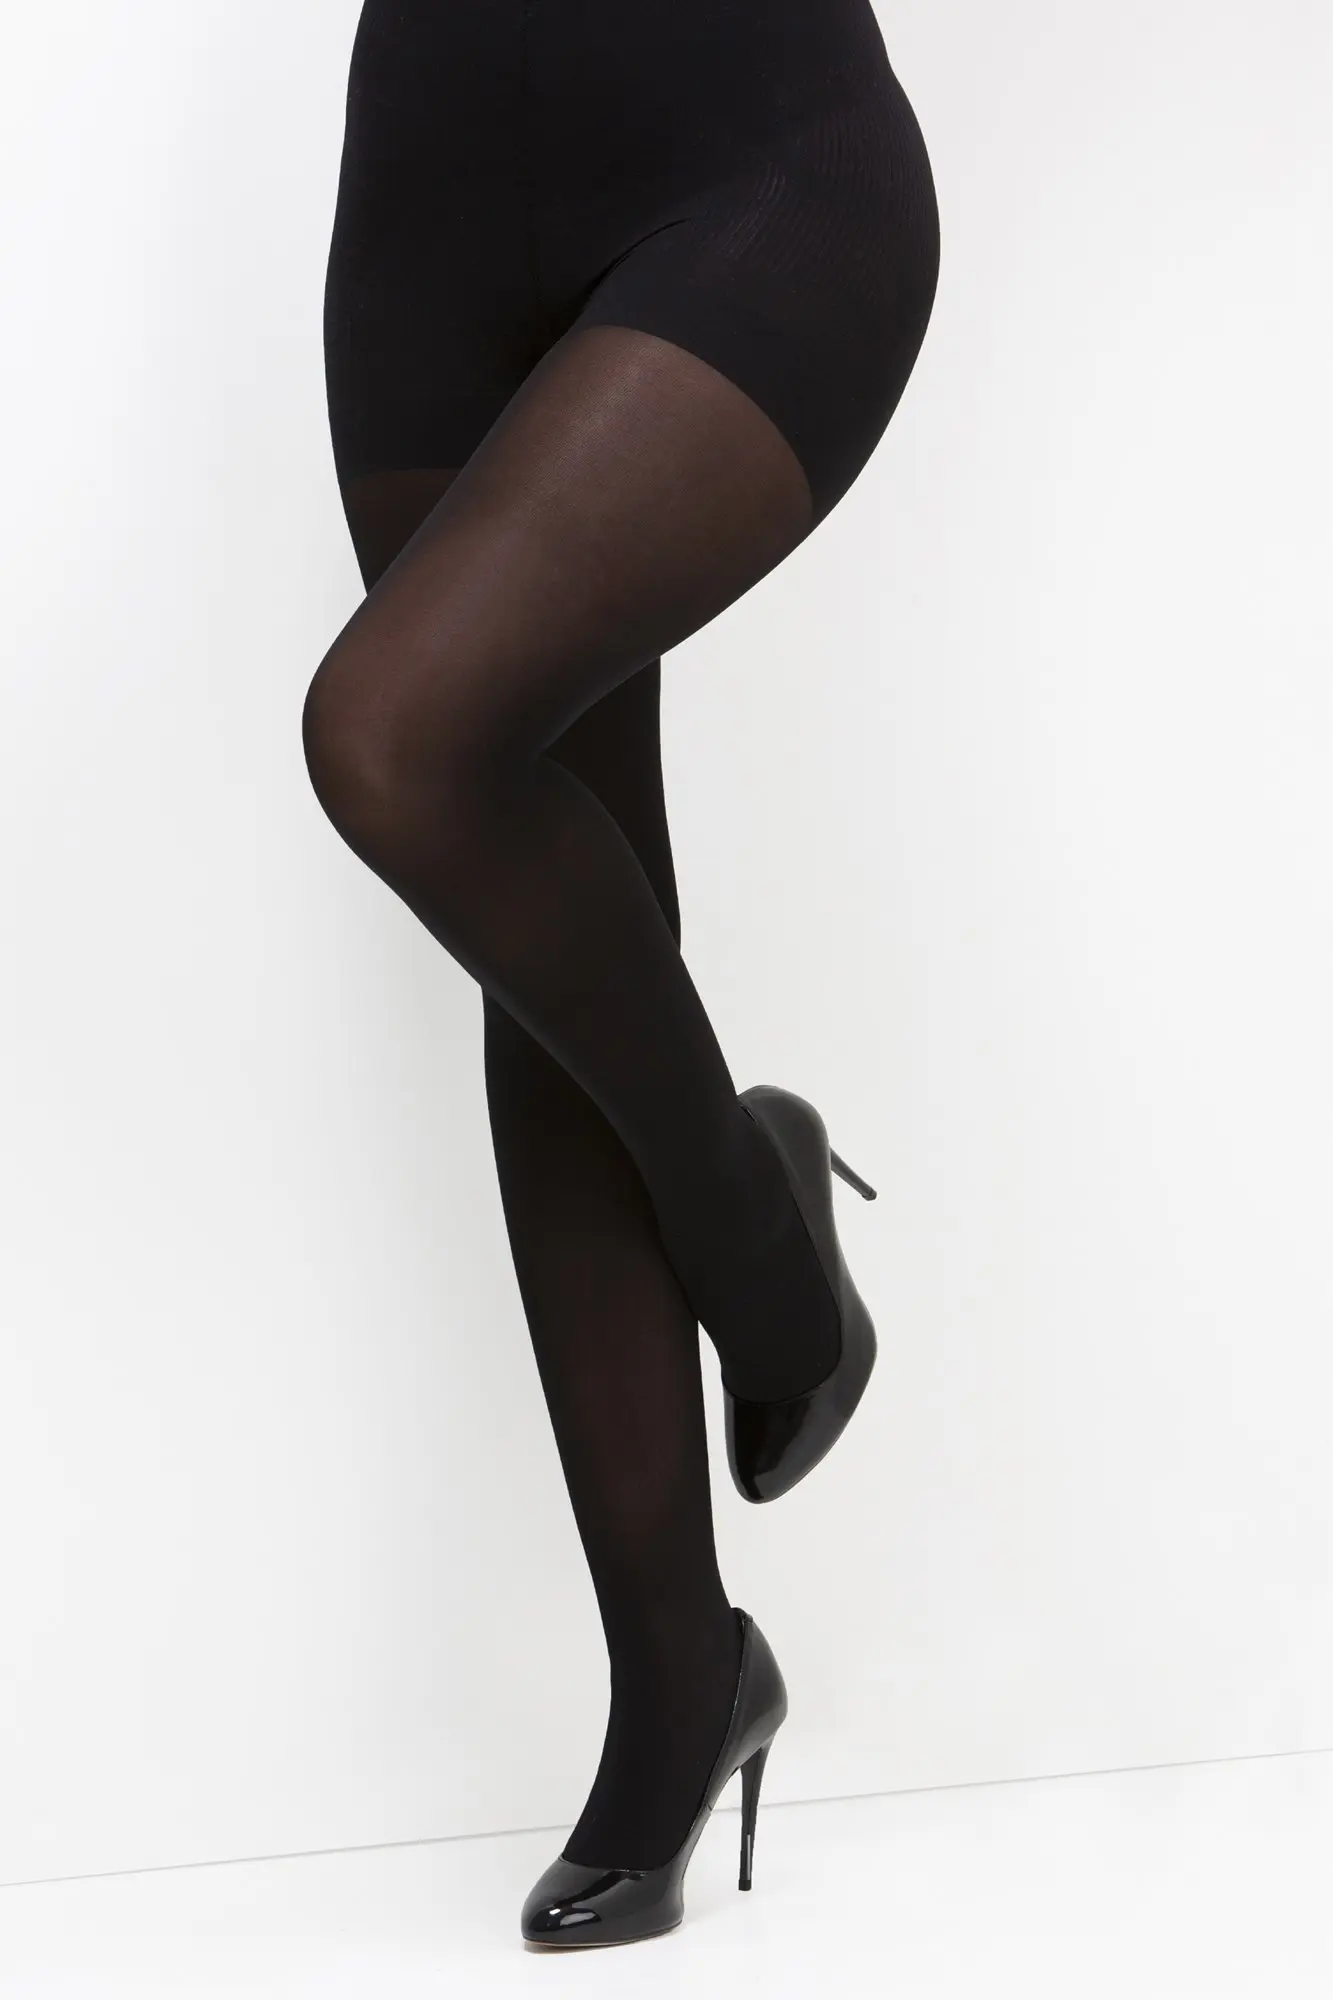 Edith Lace Tights  Sustainablehosiery